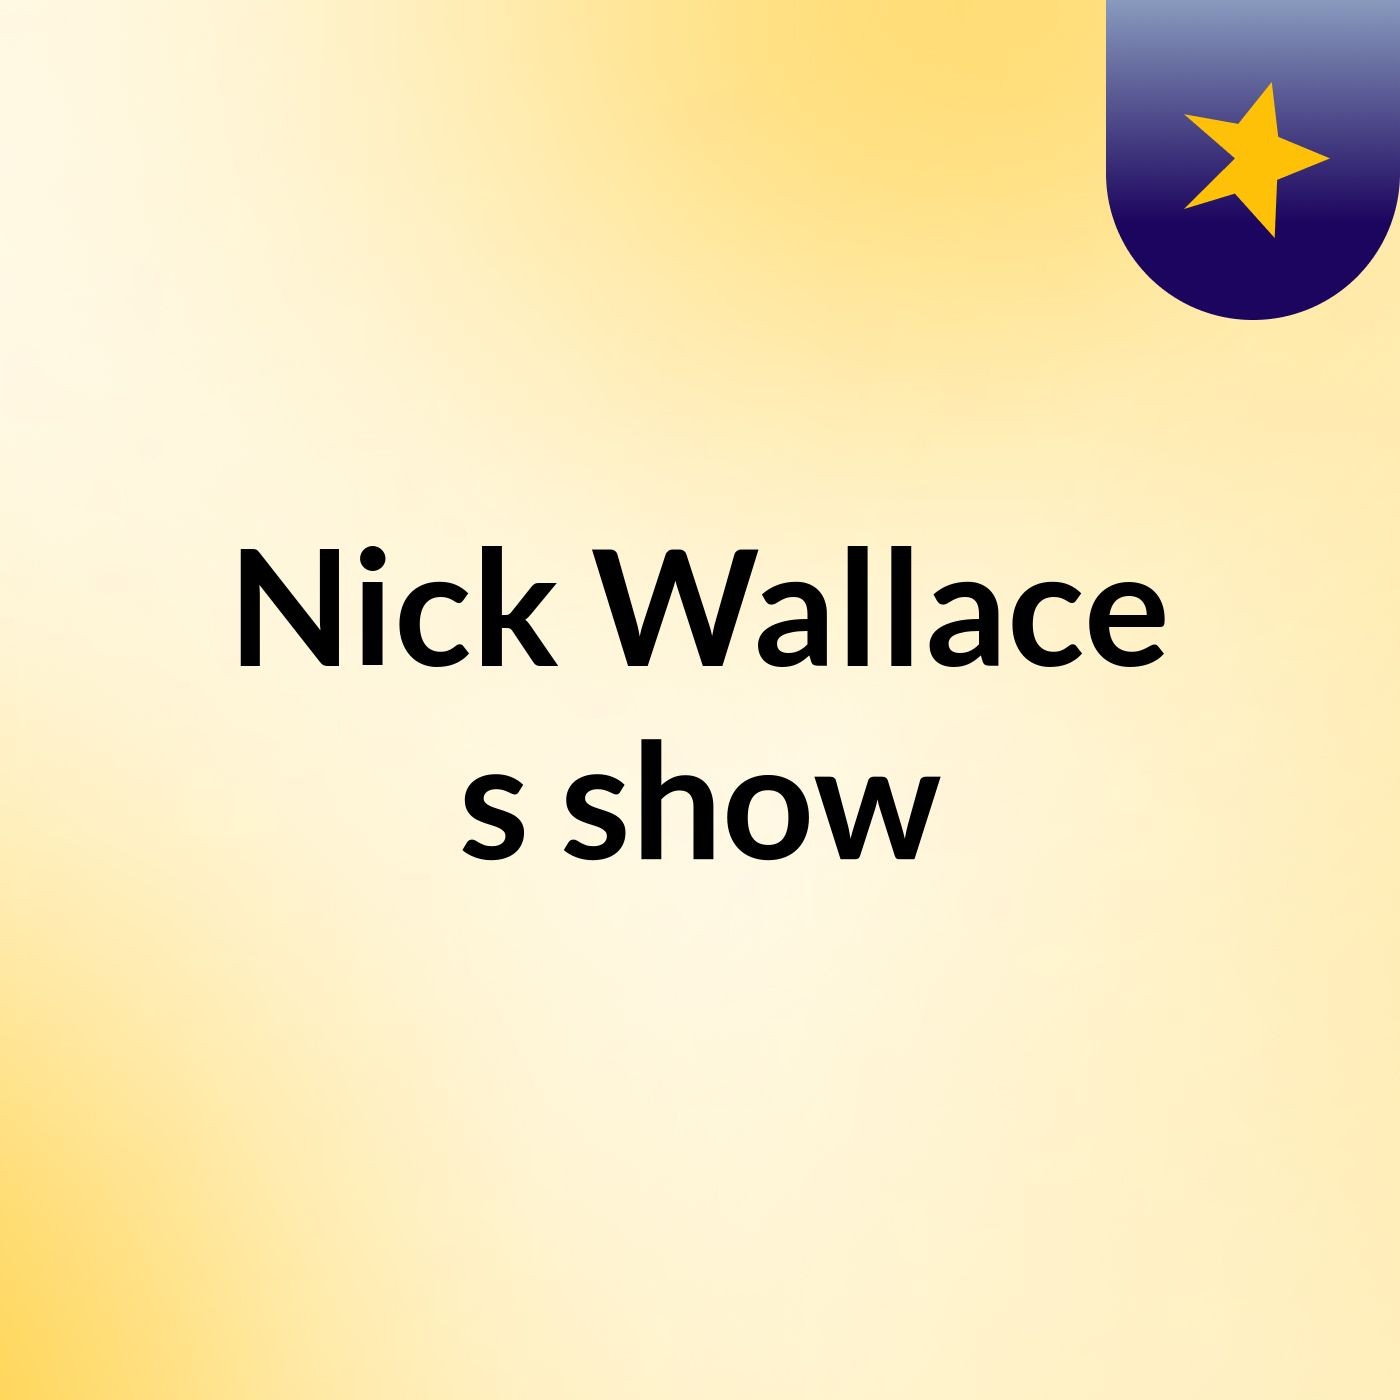 Nick Wallace's show